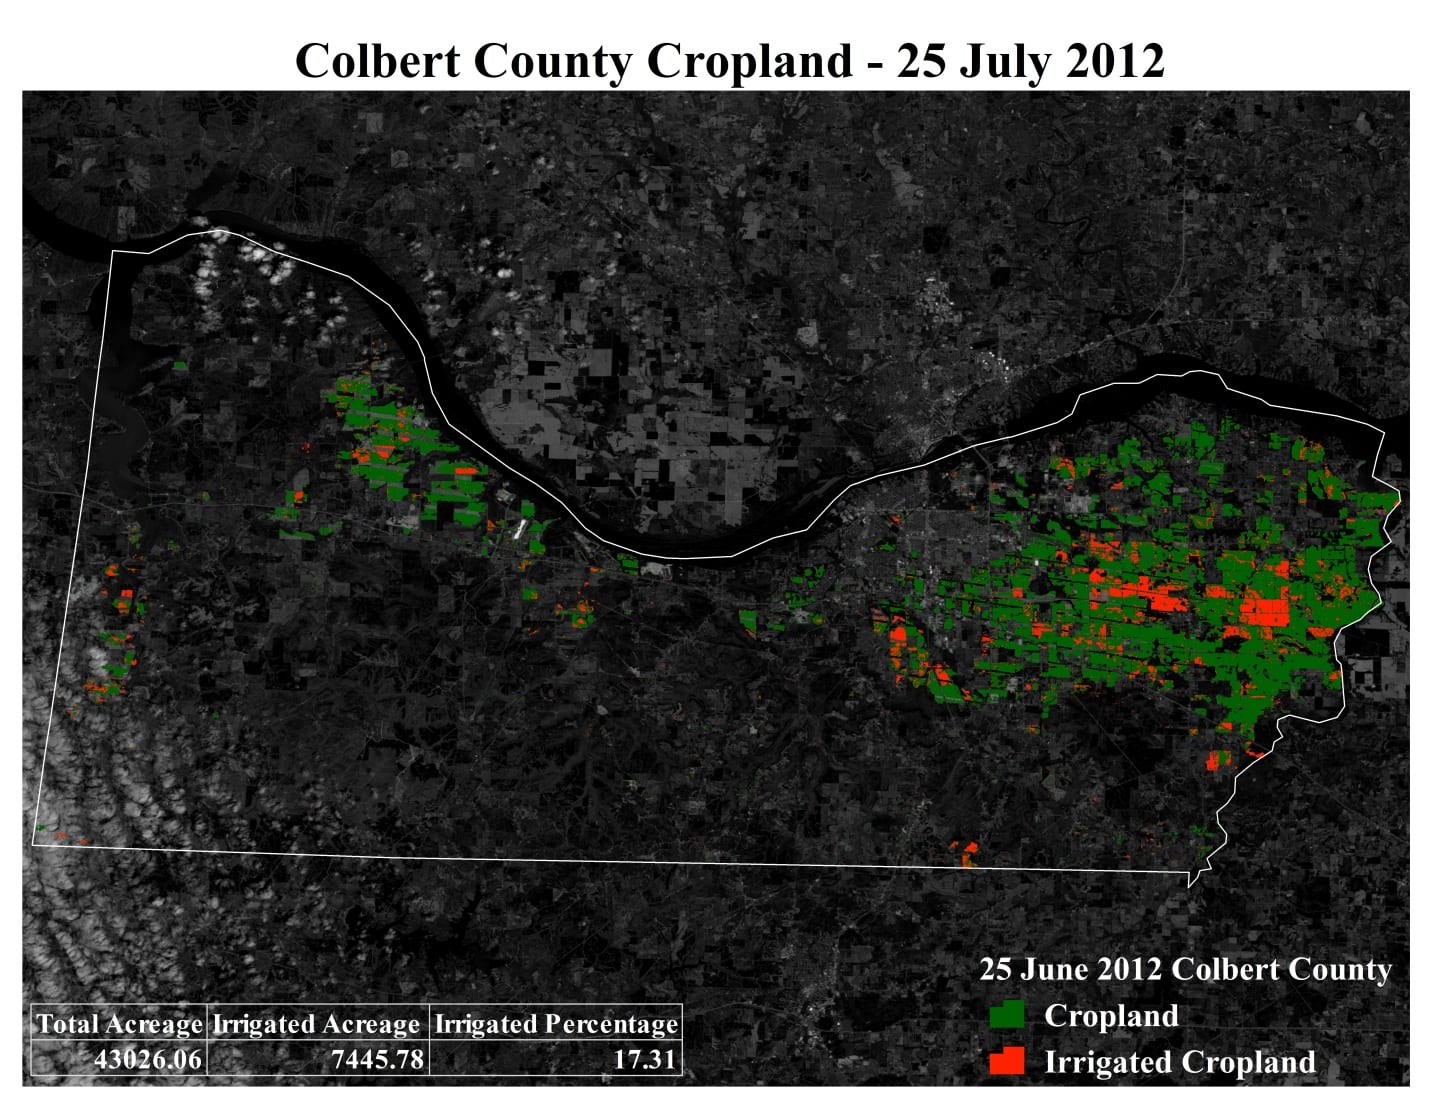 Colbert County in northwest Alabama is located directly on the Tennessee River. Using the National Agricultural Statistics Service (NASS) Crop Data Layer and a normalized difference vegetation index (NDVI) derived from a Landsat 7 image during the 2012 drought event, irrigated cropland can be inferred statistically and partition rain-fed versus irrigated crops. Image Credit: Alabama Agriculture Team, NASA DEVELOP National Program.